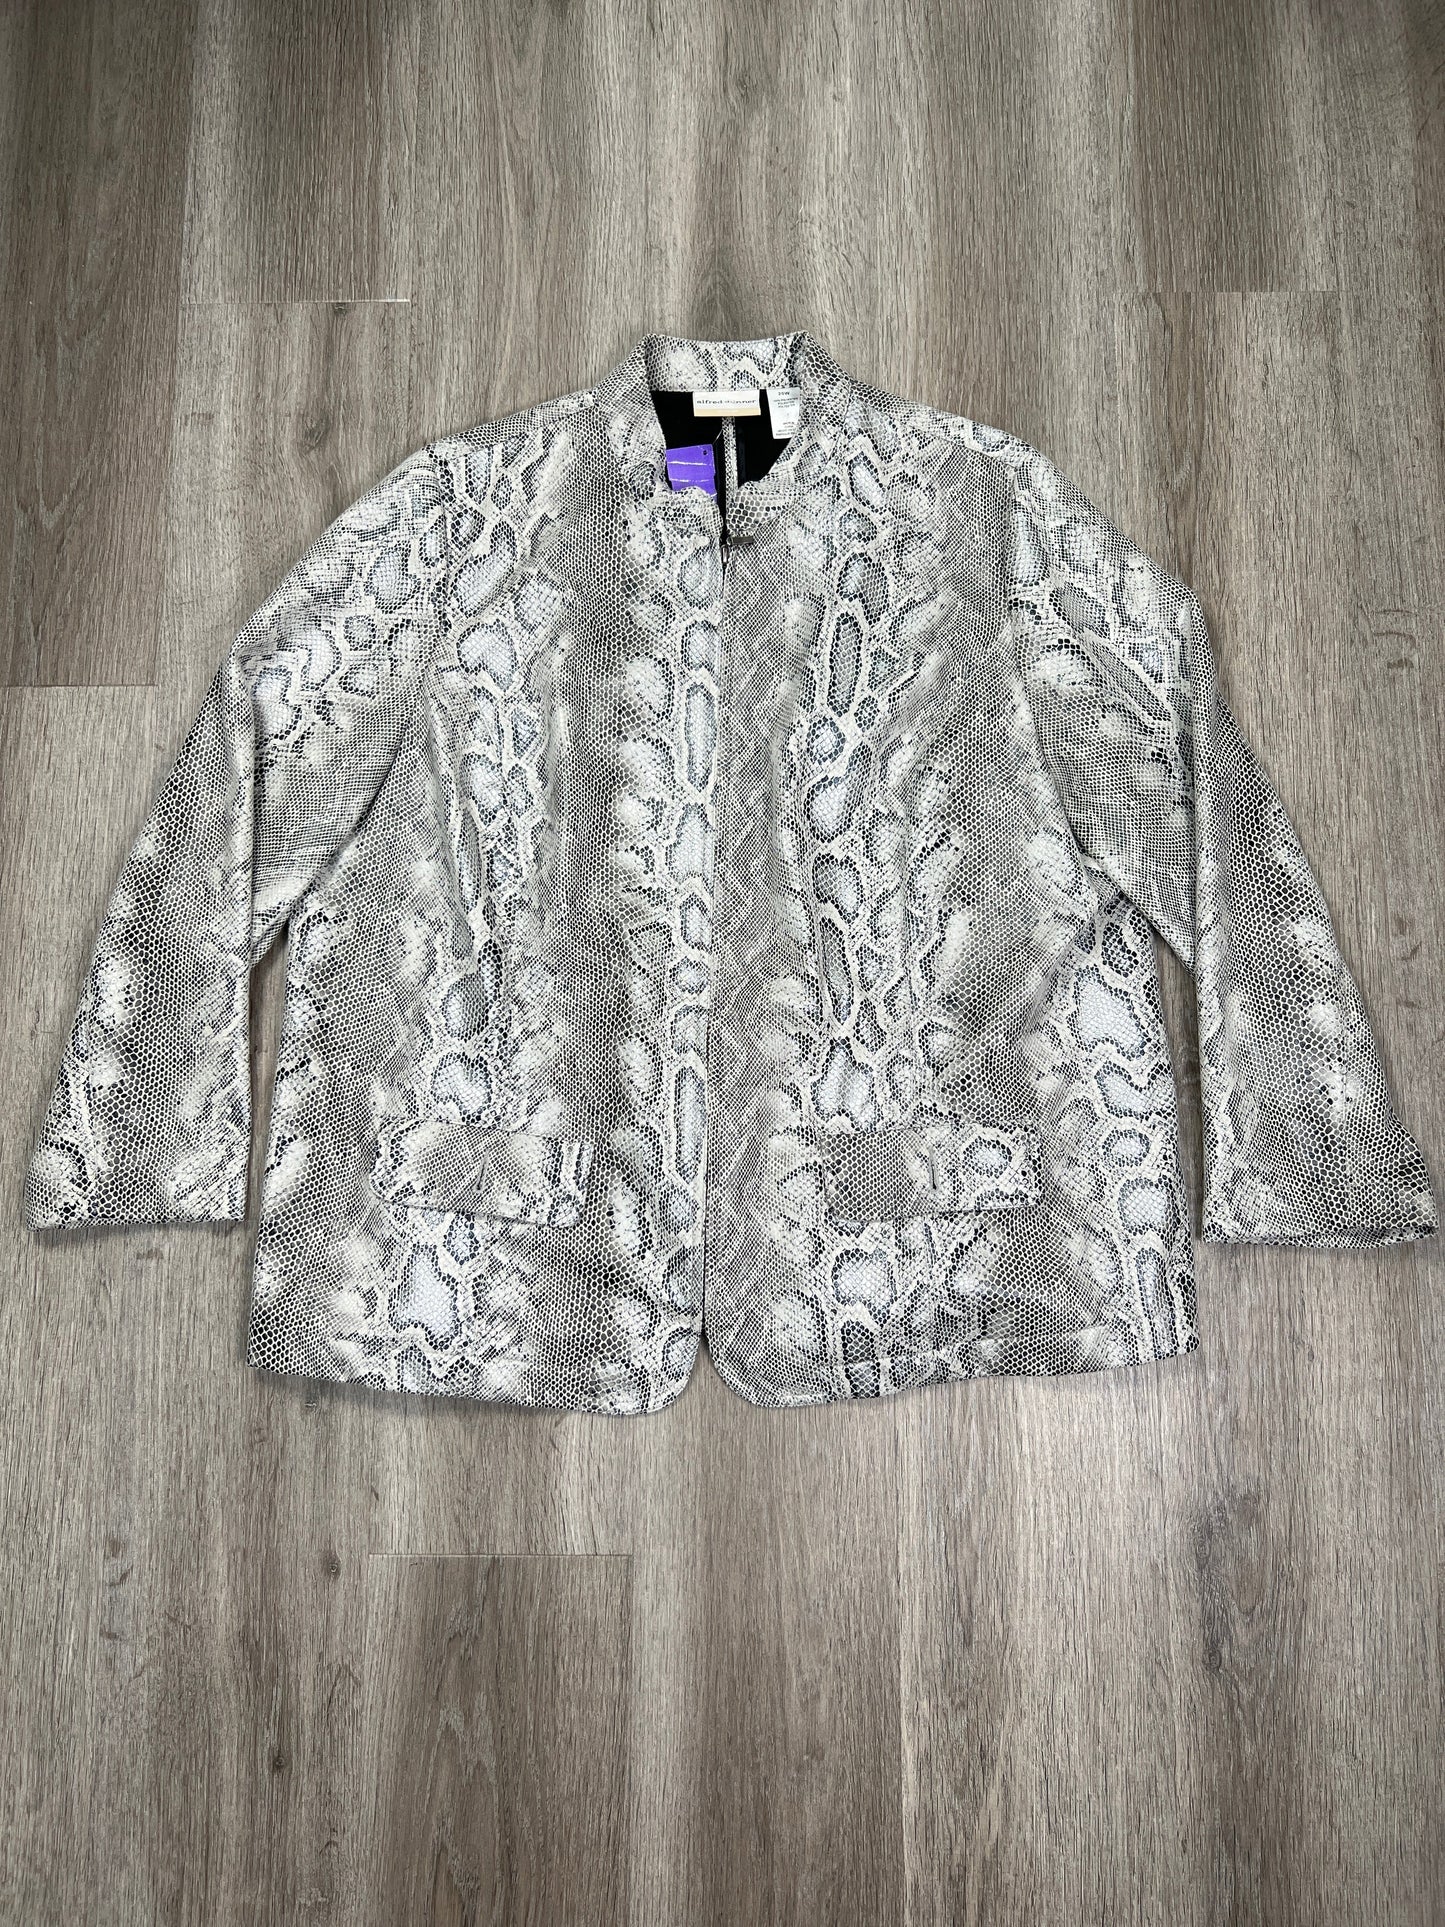 Snakeskin Print Jacket Other Alfred Dunner, Size 2x